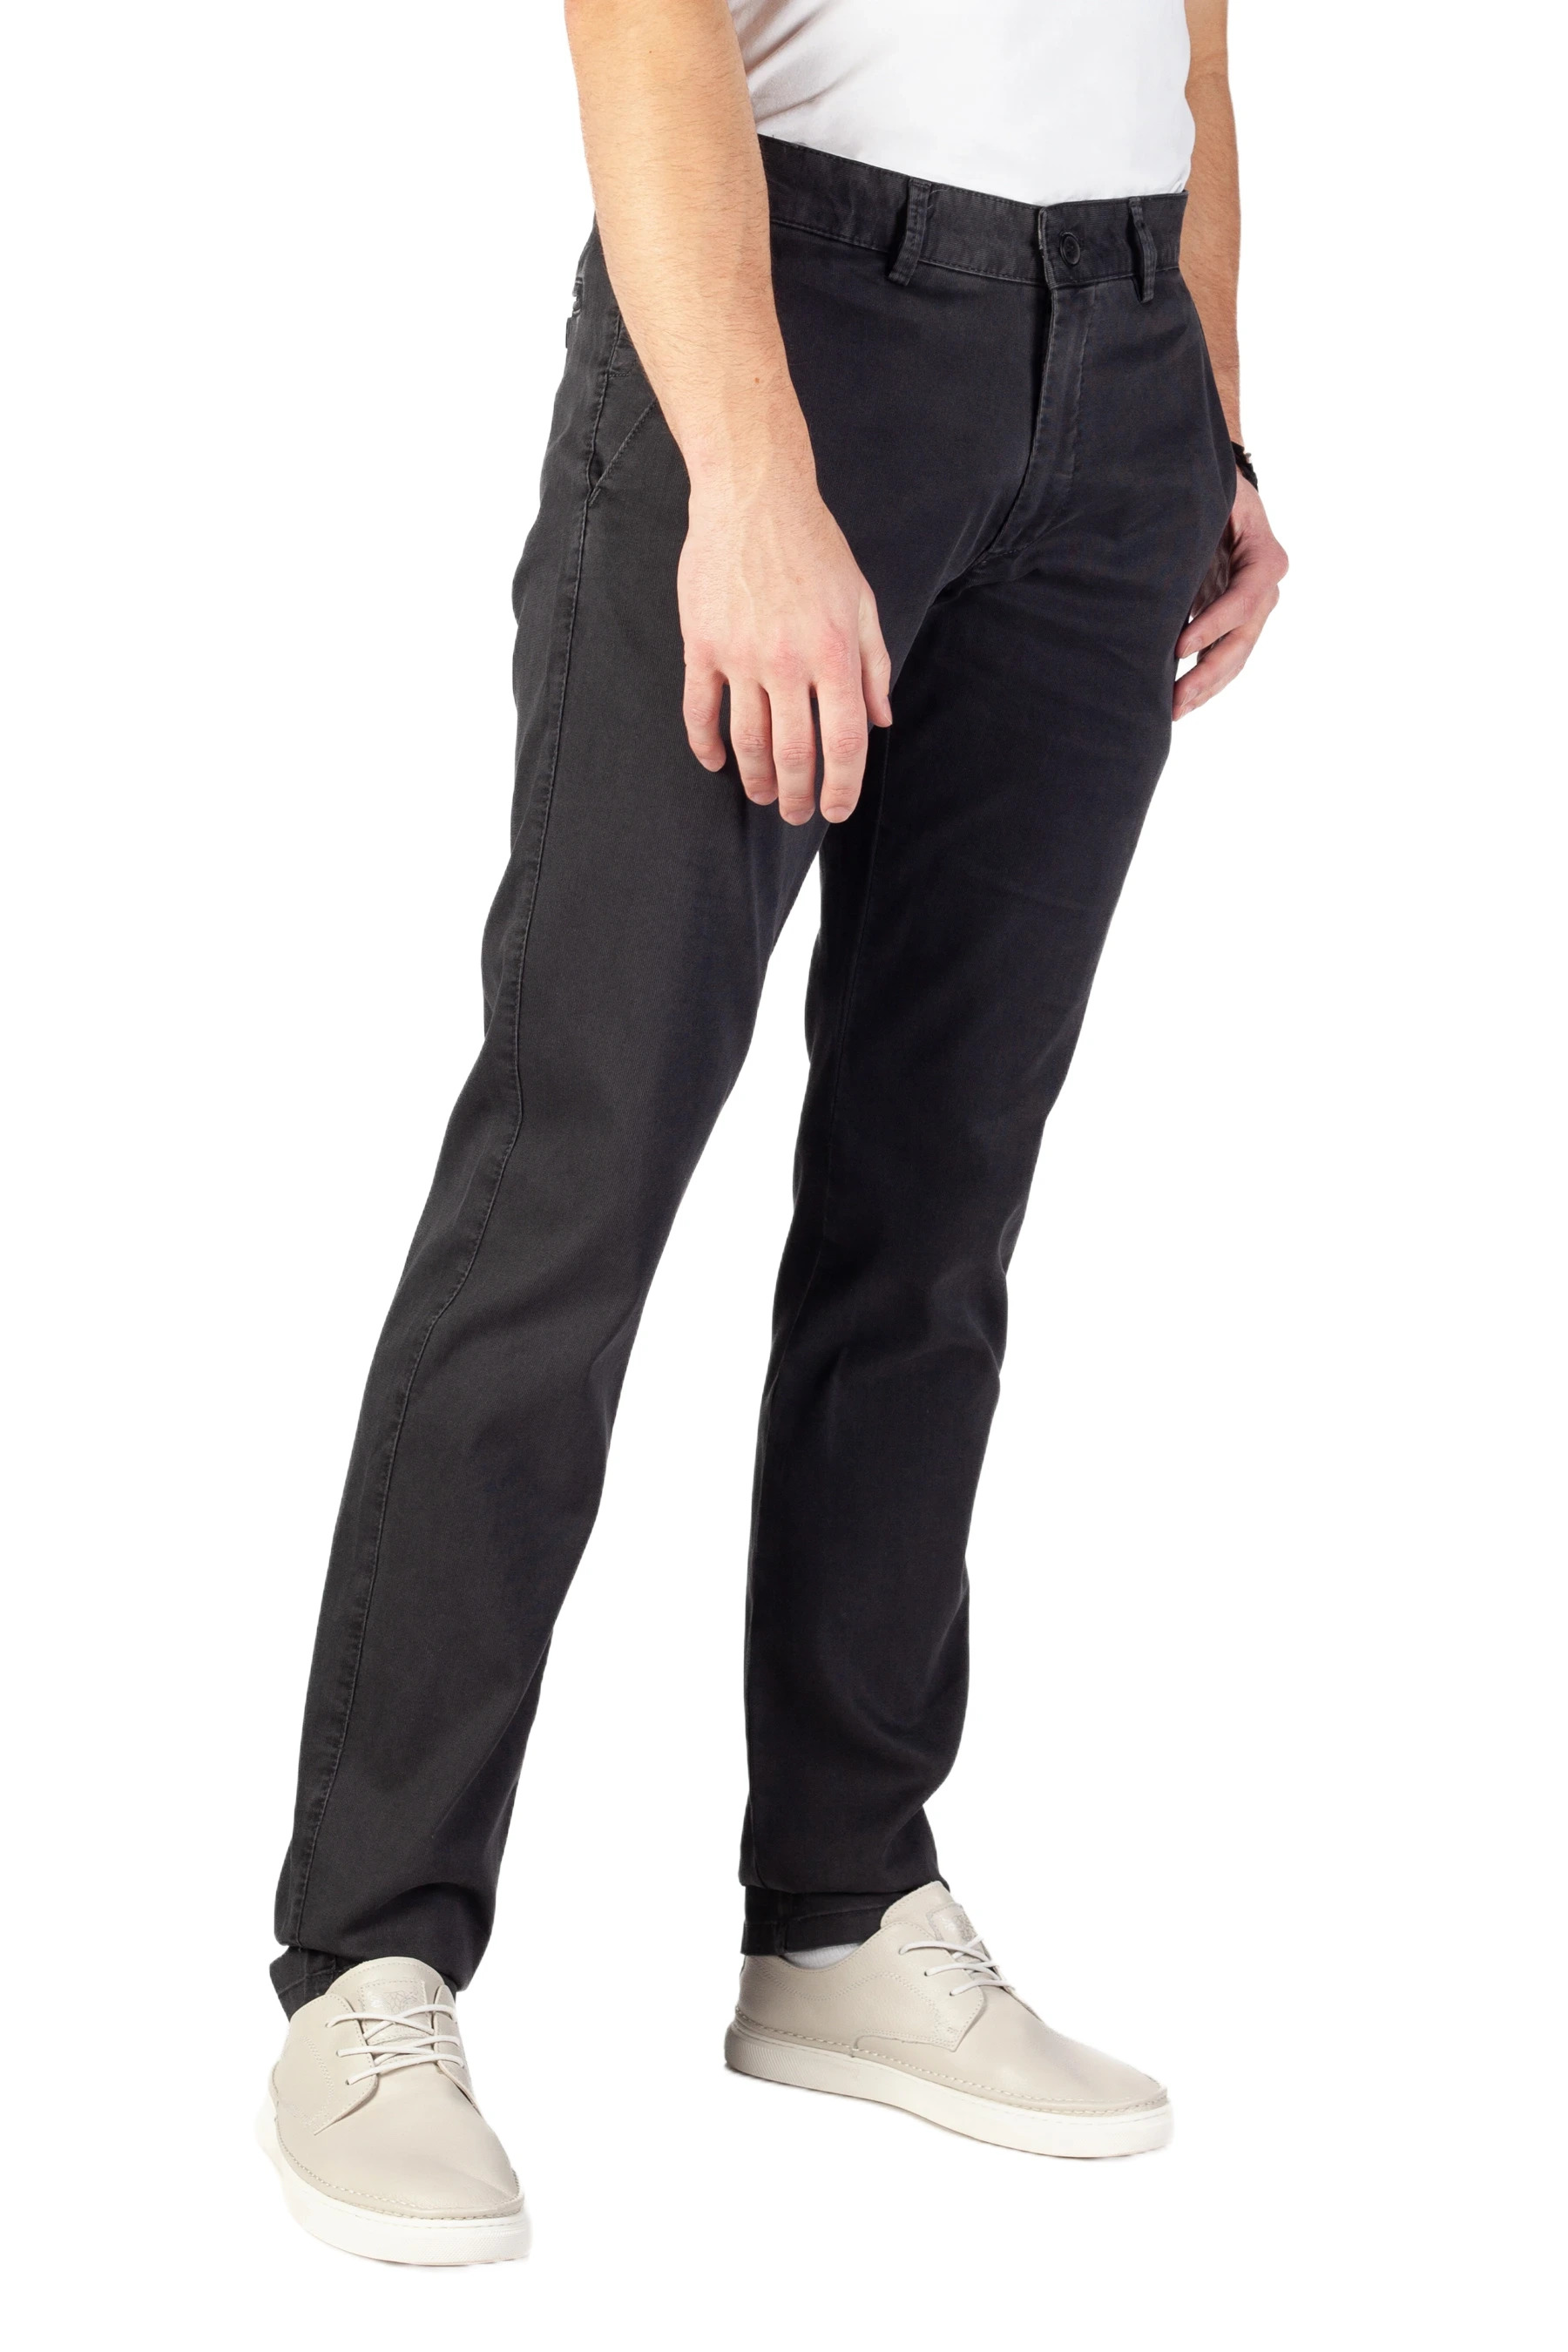 Chino pants BLK JEANS 8375-5110-183-206